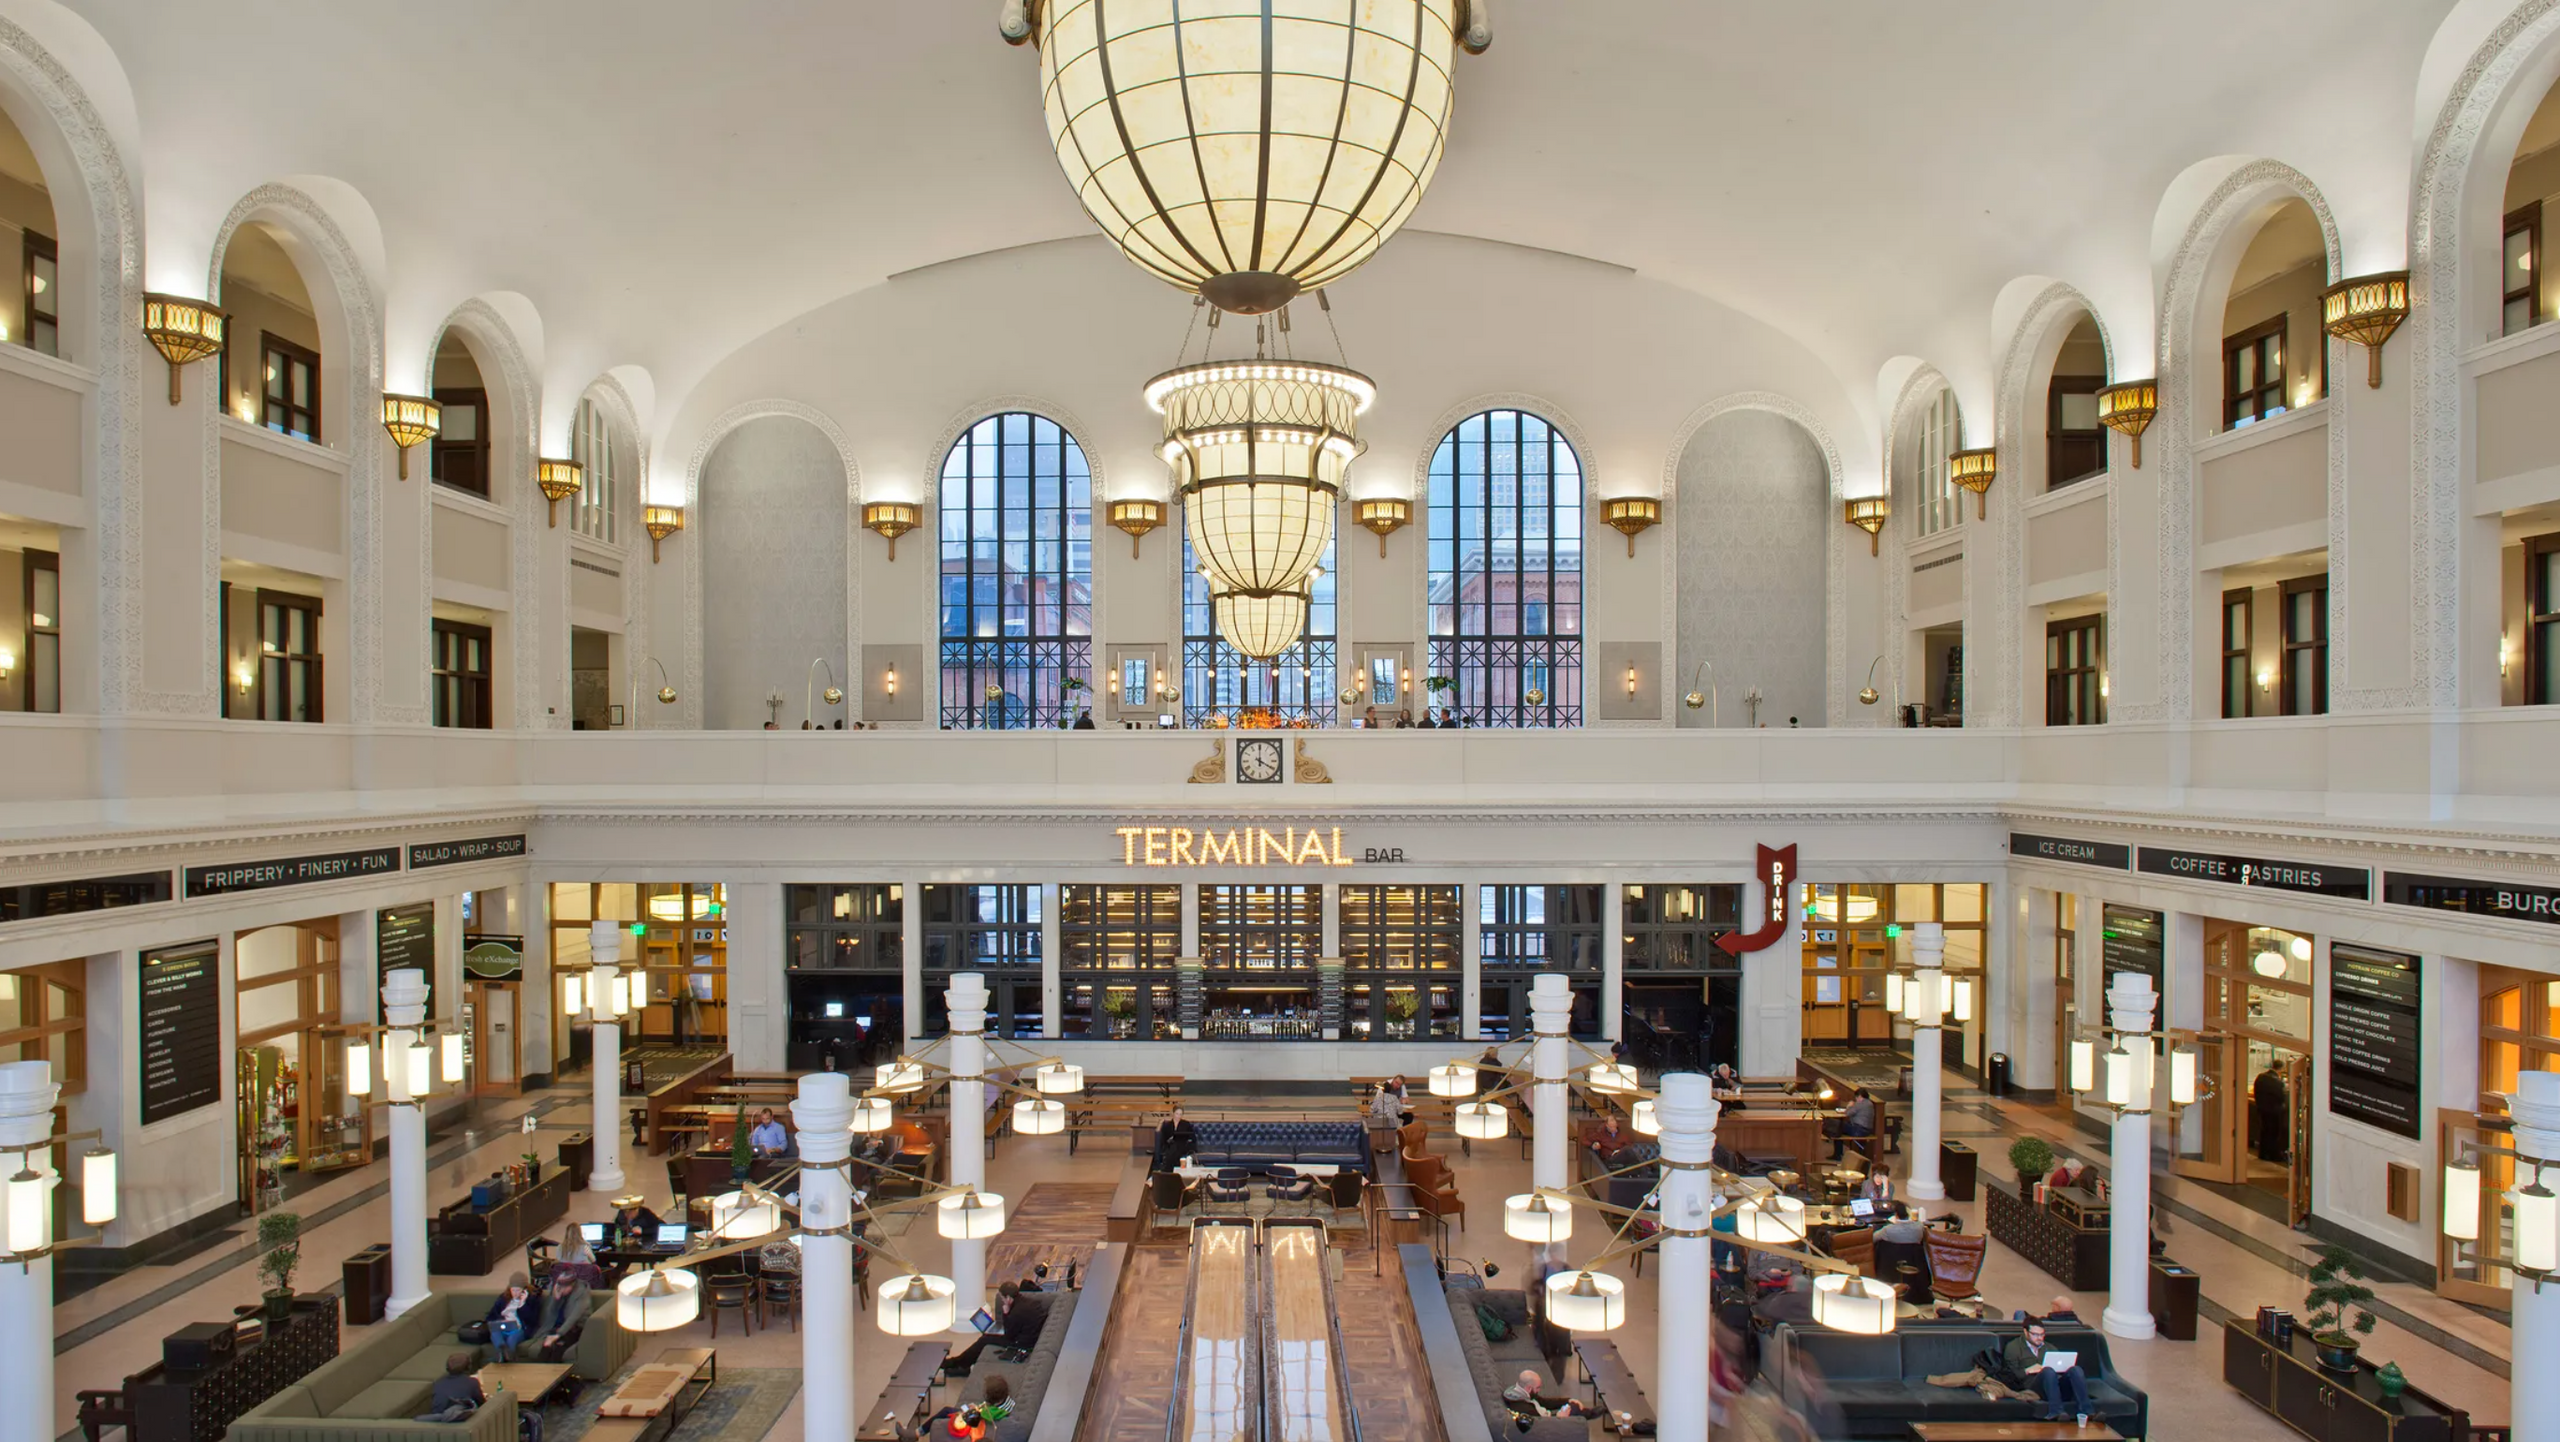 View from inside Union Station, where the Crawford Hotel is located